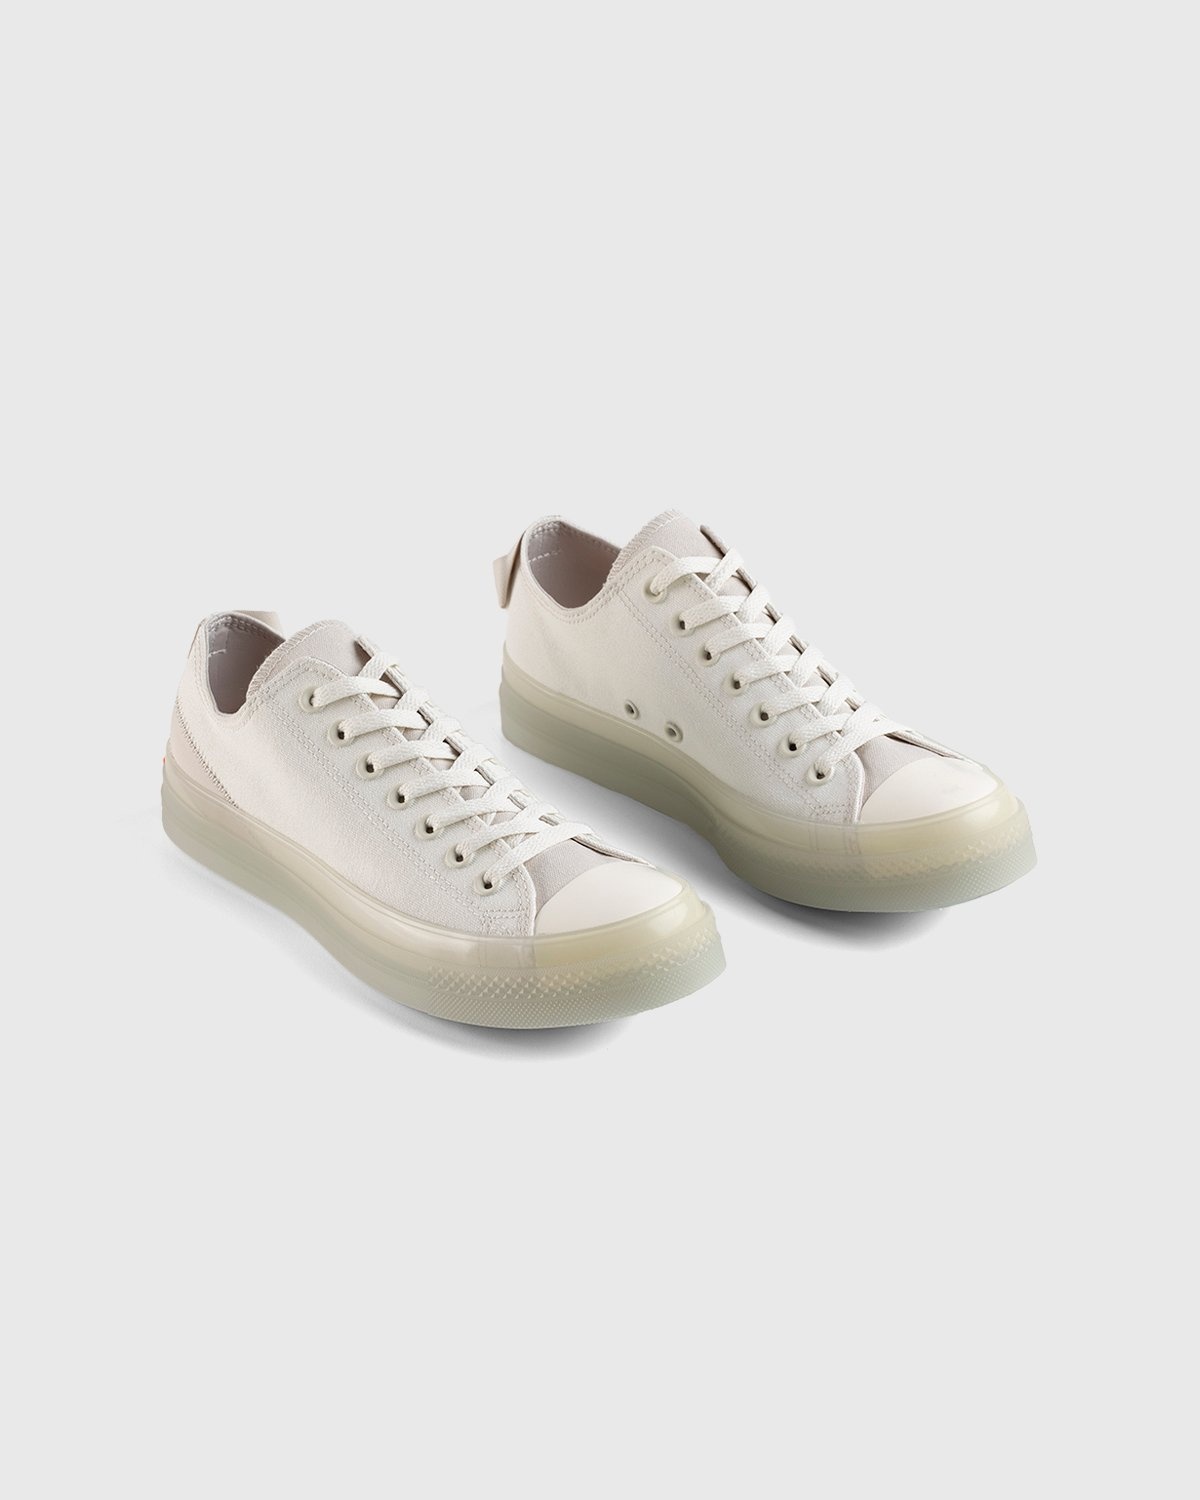 Converse – Chuck Taylor All Star CX Egret/Desert Sand - Low Top Sneakers - Grey - Image 4